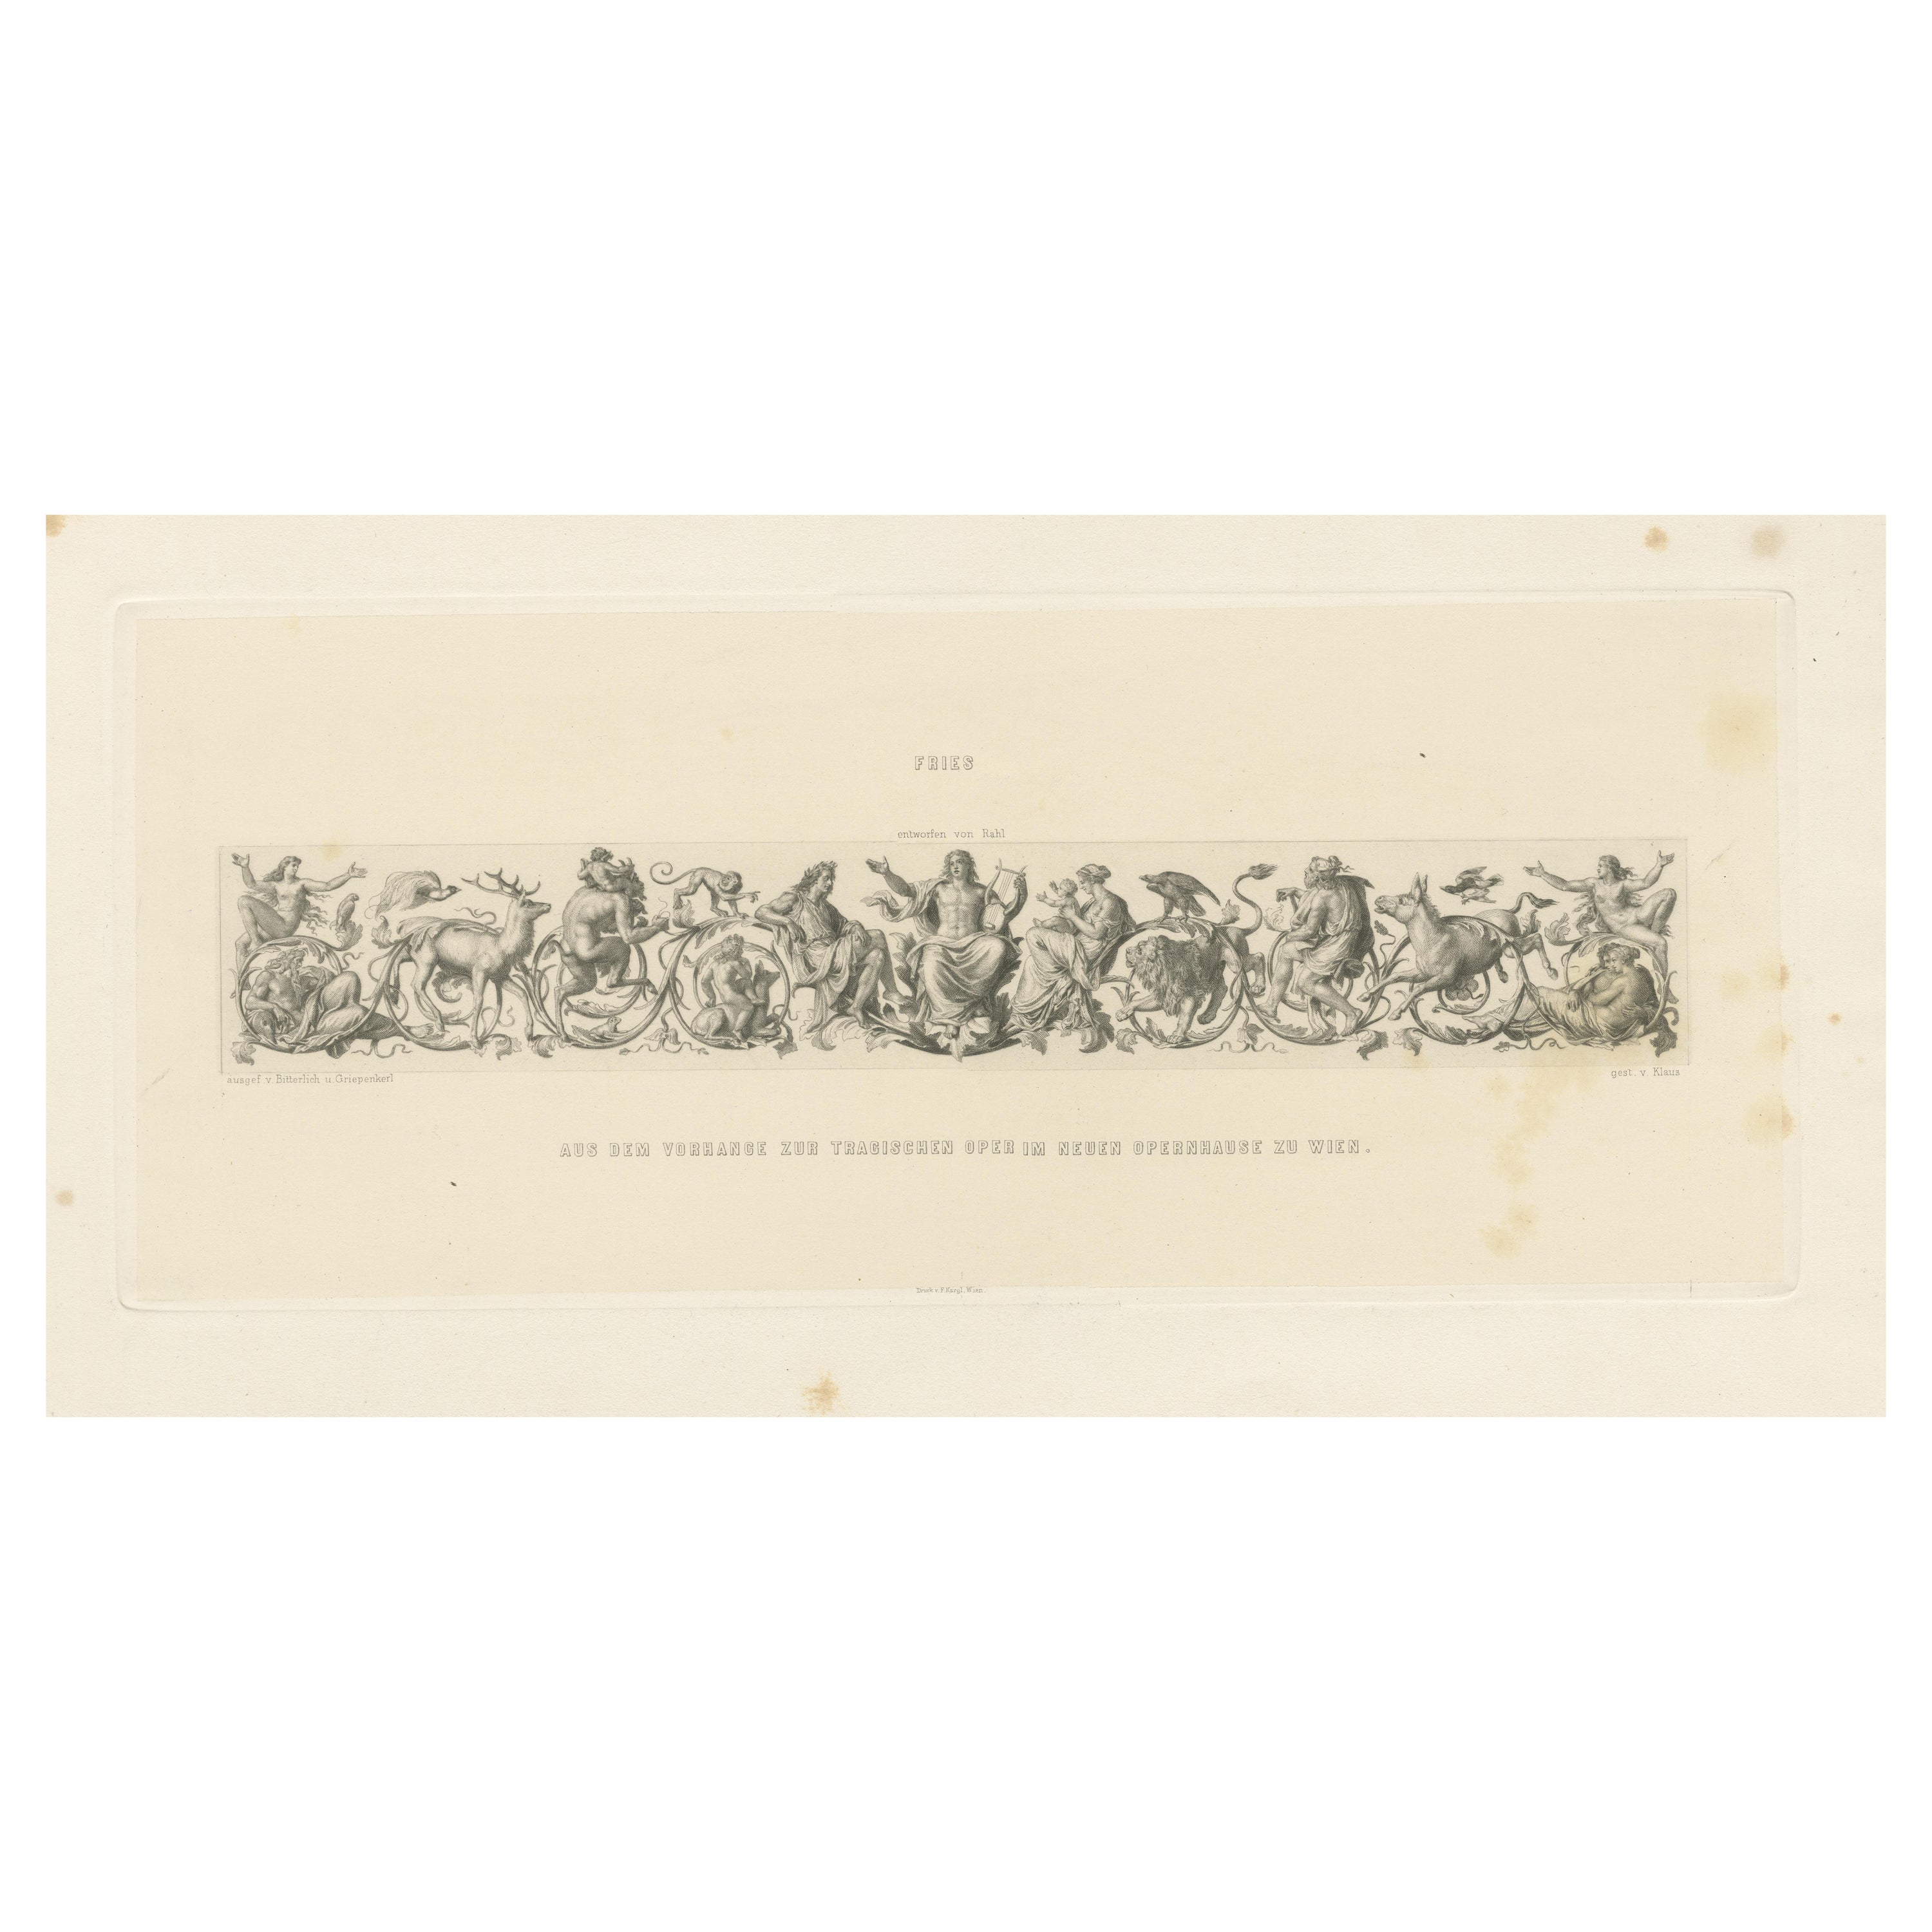 Antique Print 'Frieze' of the Curtain in the New Opera House in Vienna For Sale